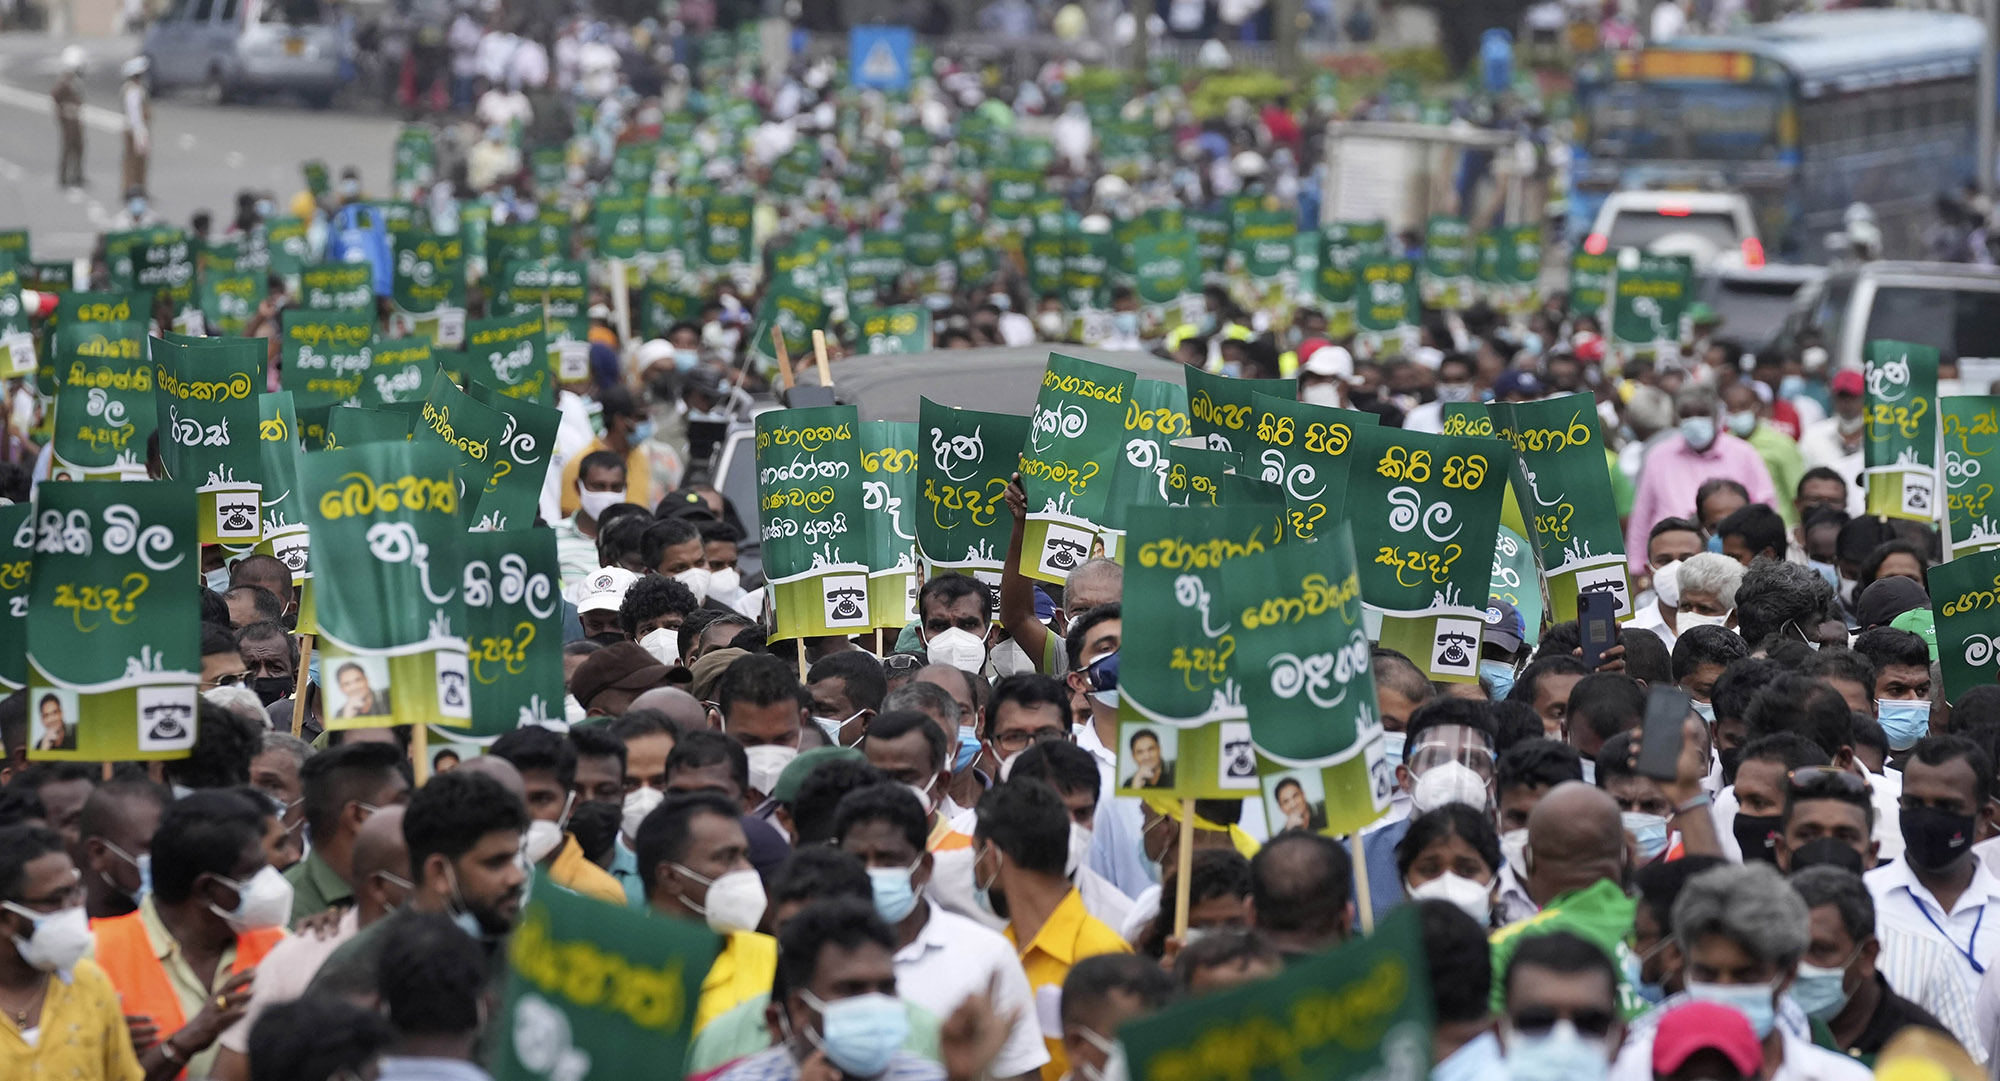 Sri Lanka Opposition Rallies Thousands to Protest Economic Woes - Bloomberg